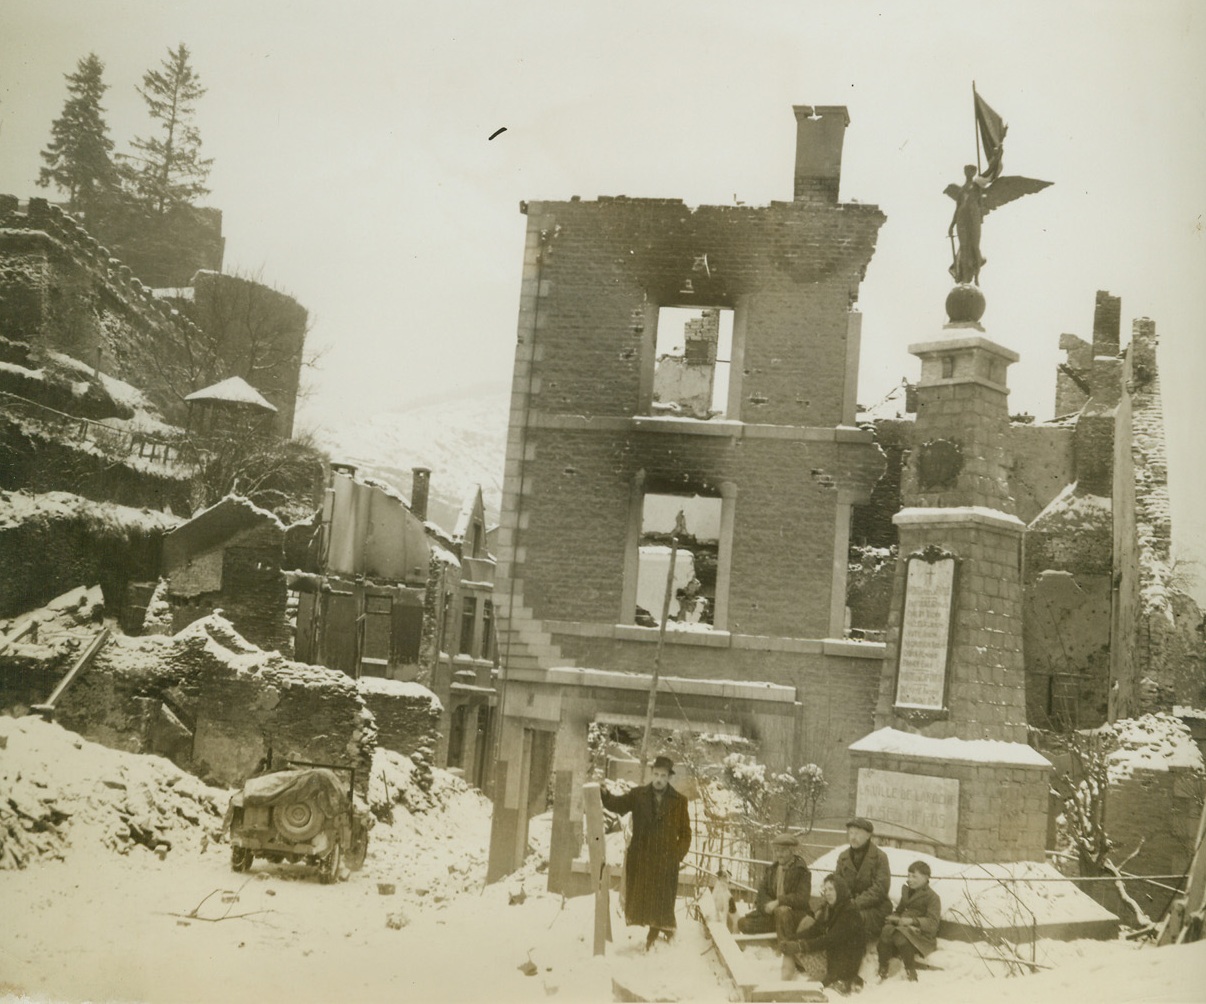 Victory Looks Down on Beaten La Roche, 1/19/1945. BELGIUM – Civilians of the Belgian town of La Roche stand beneath the winged victory symbol, memorial of World War I, against a background of destruction caused by battles in this world-wide struggle. Residents of city had returned to their homes after Yanks had forced Nazis to retreat to hills. Photo by Acme photographer, Harold Siegman, for the War Picture Pool.Credit  -WP- (Acme);